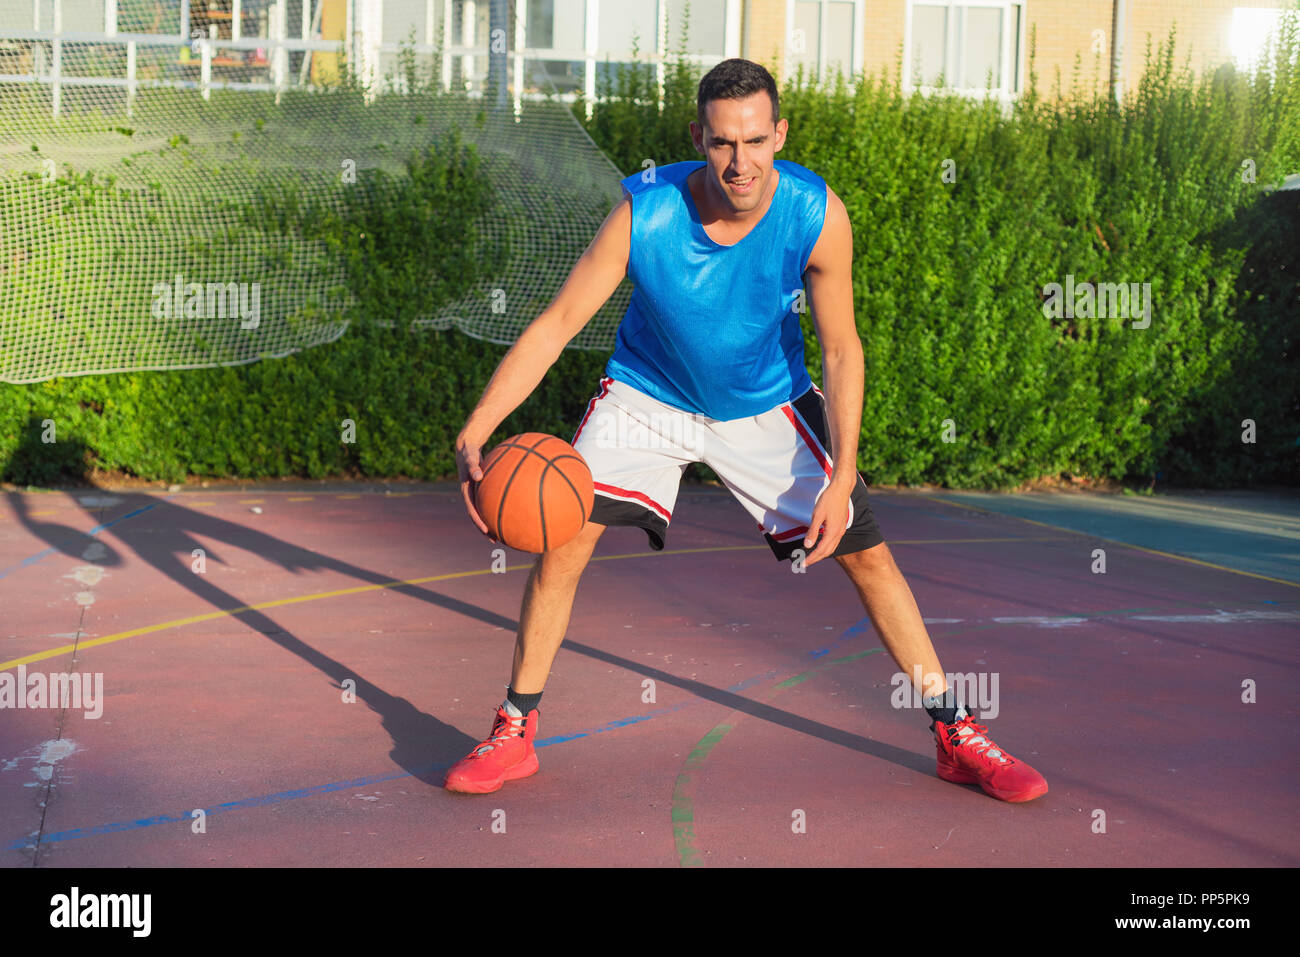 Young man athlete on basketball court dribbling Stock Photo